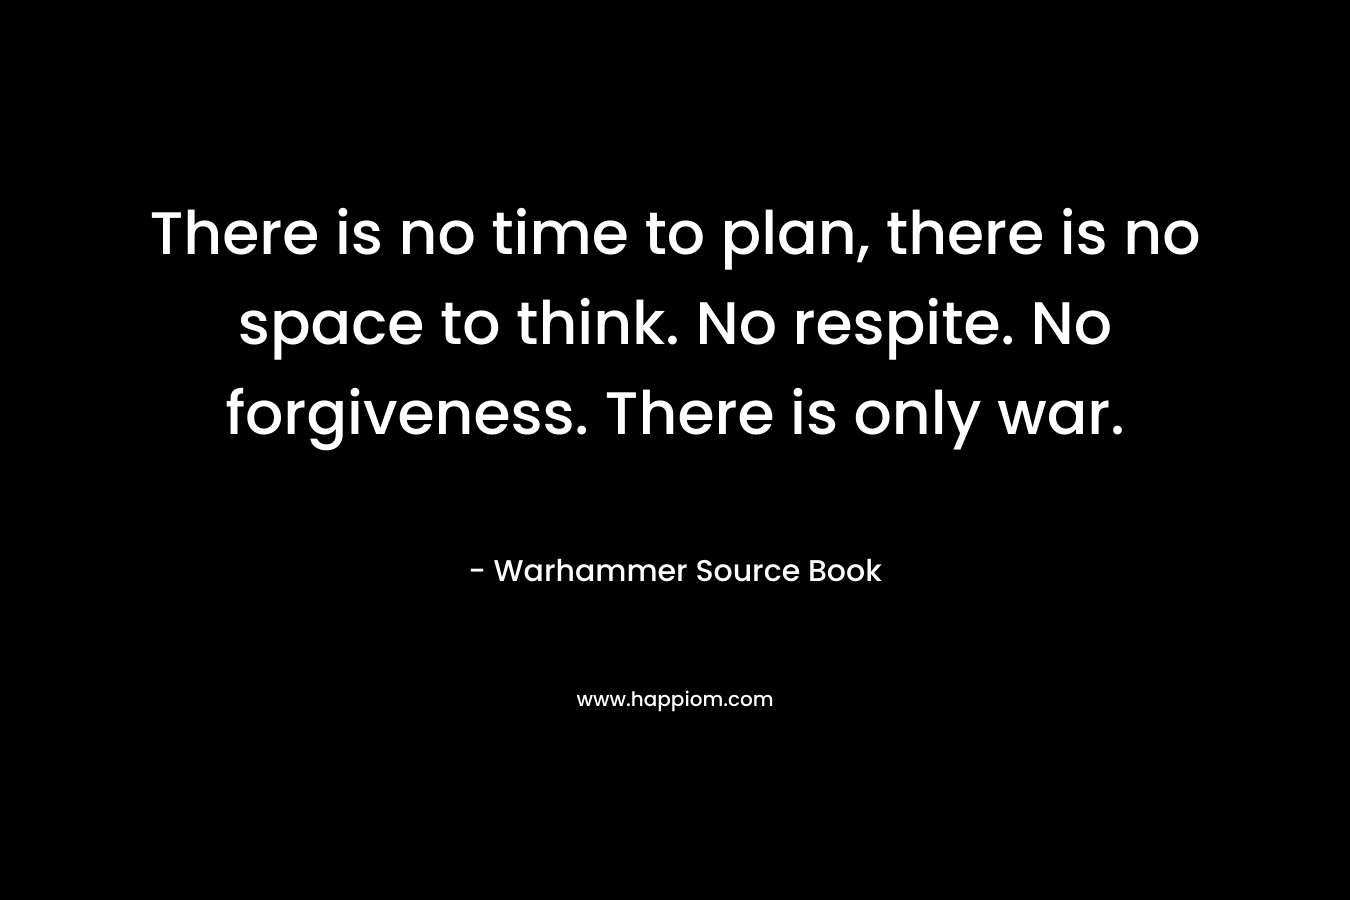 There is no time to plan, there is no space to think. No respite. No forgiveness. There is only war. – Warhammer   Source Book